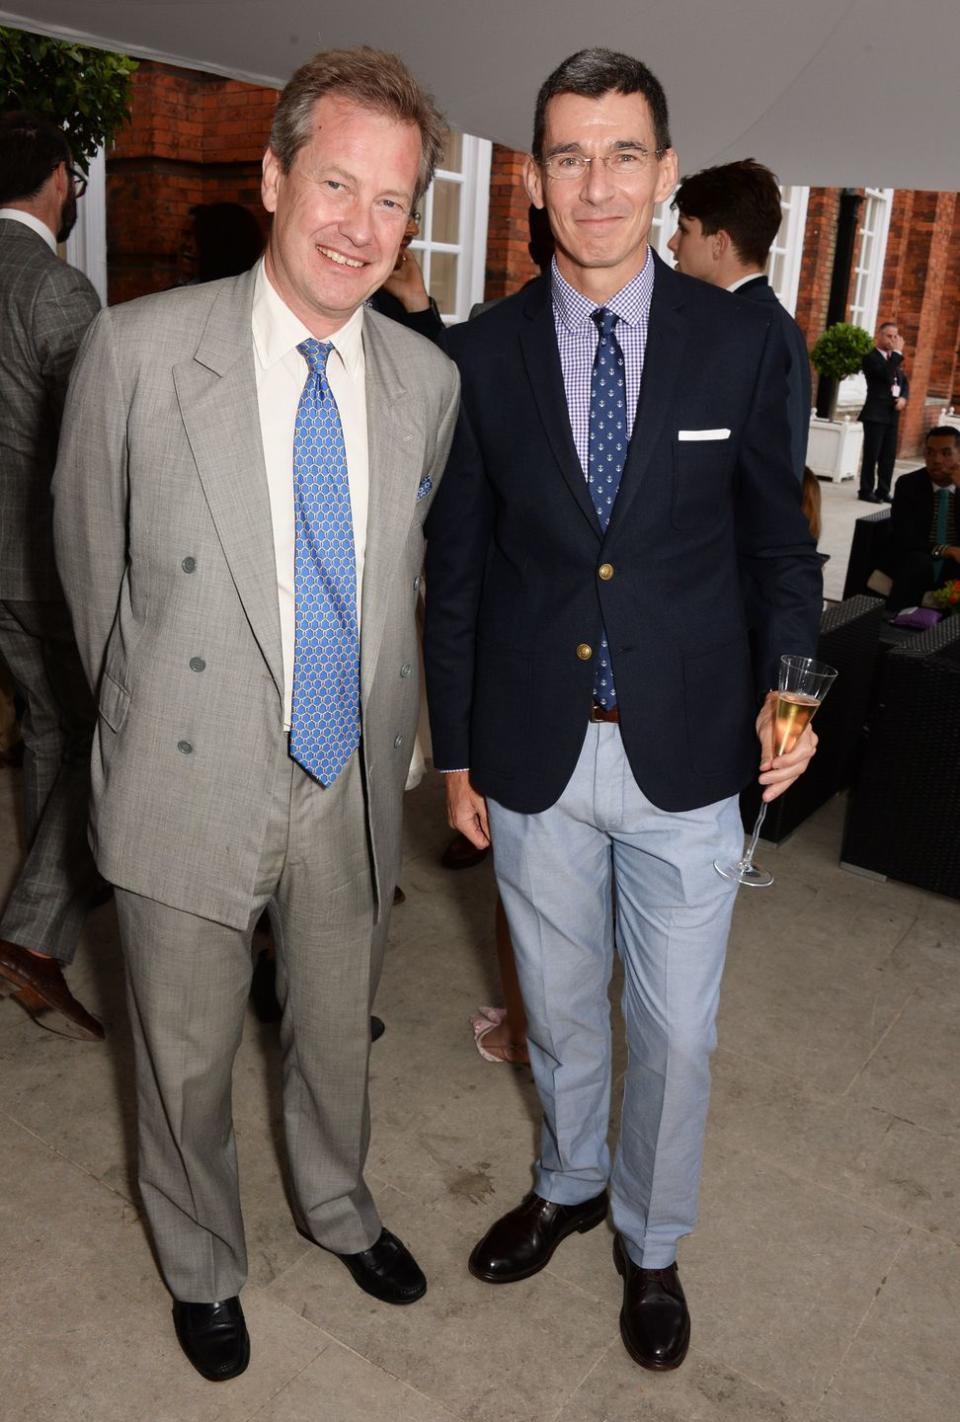 london, england june 19 lord ivar mountbatten l and chip bergh, president and ceo of levi strauss co, attend the drinks reception hosted by dockers, the san francisco based apparel brand, at kensington palace on the eve of dockers flannels for heroes cricket match on june 19, 2014 in london, england photo by david m benettgetty images for dockers